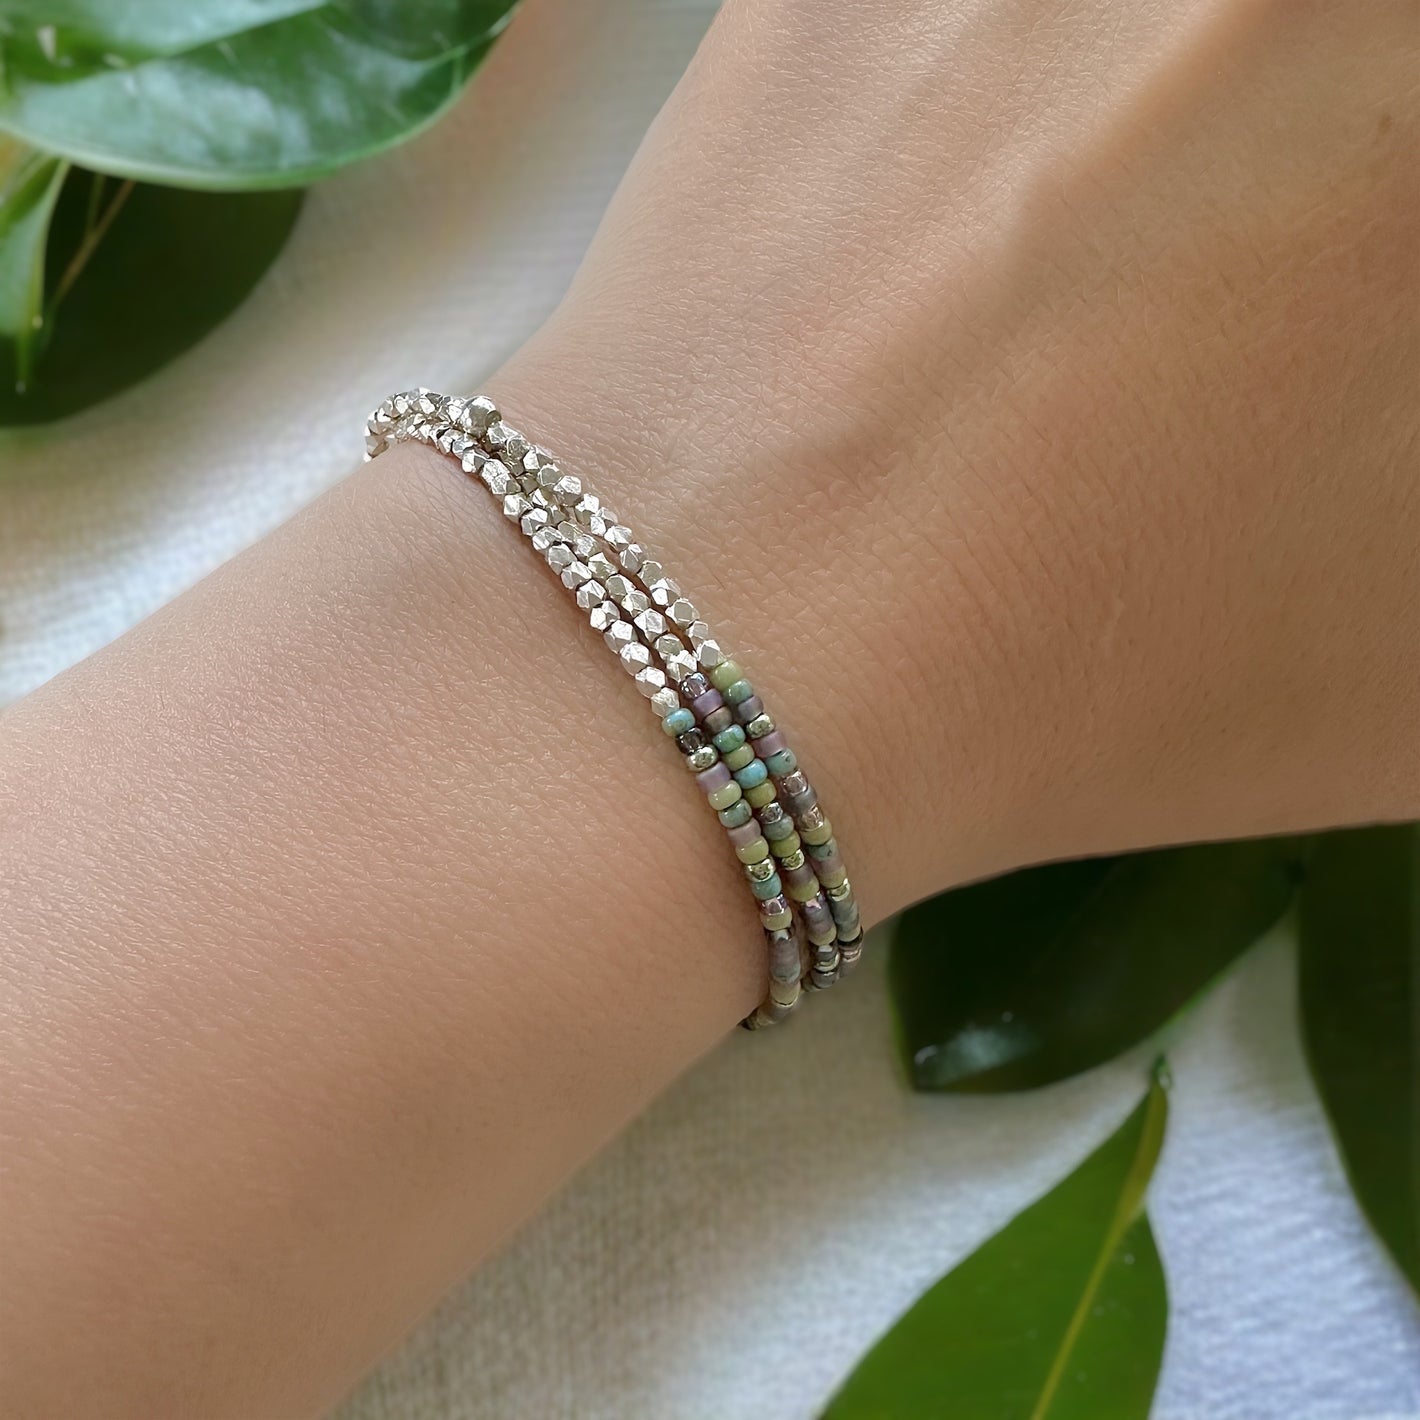 Beaded triple wrap stretch bracelet made with 11/0 Miyuki seed beads and 2mm Karen Hill Tribe fine silver beads worn on a woman's wrist against a white cloth with green leaves 